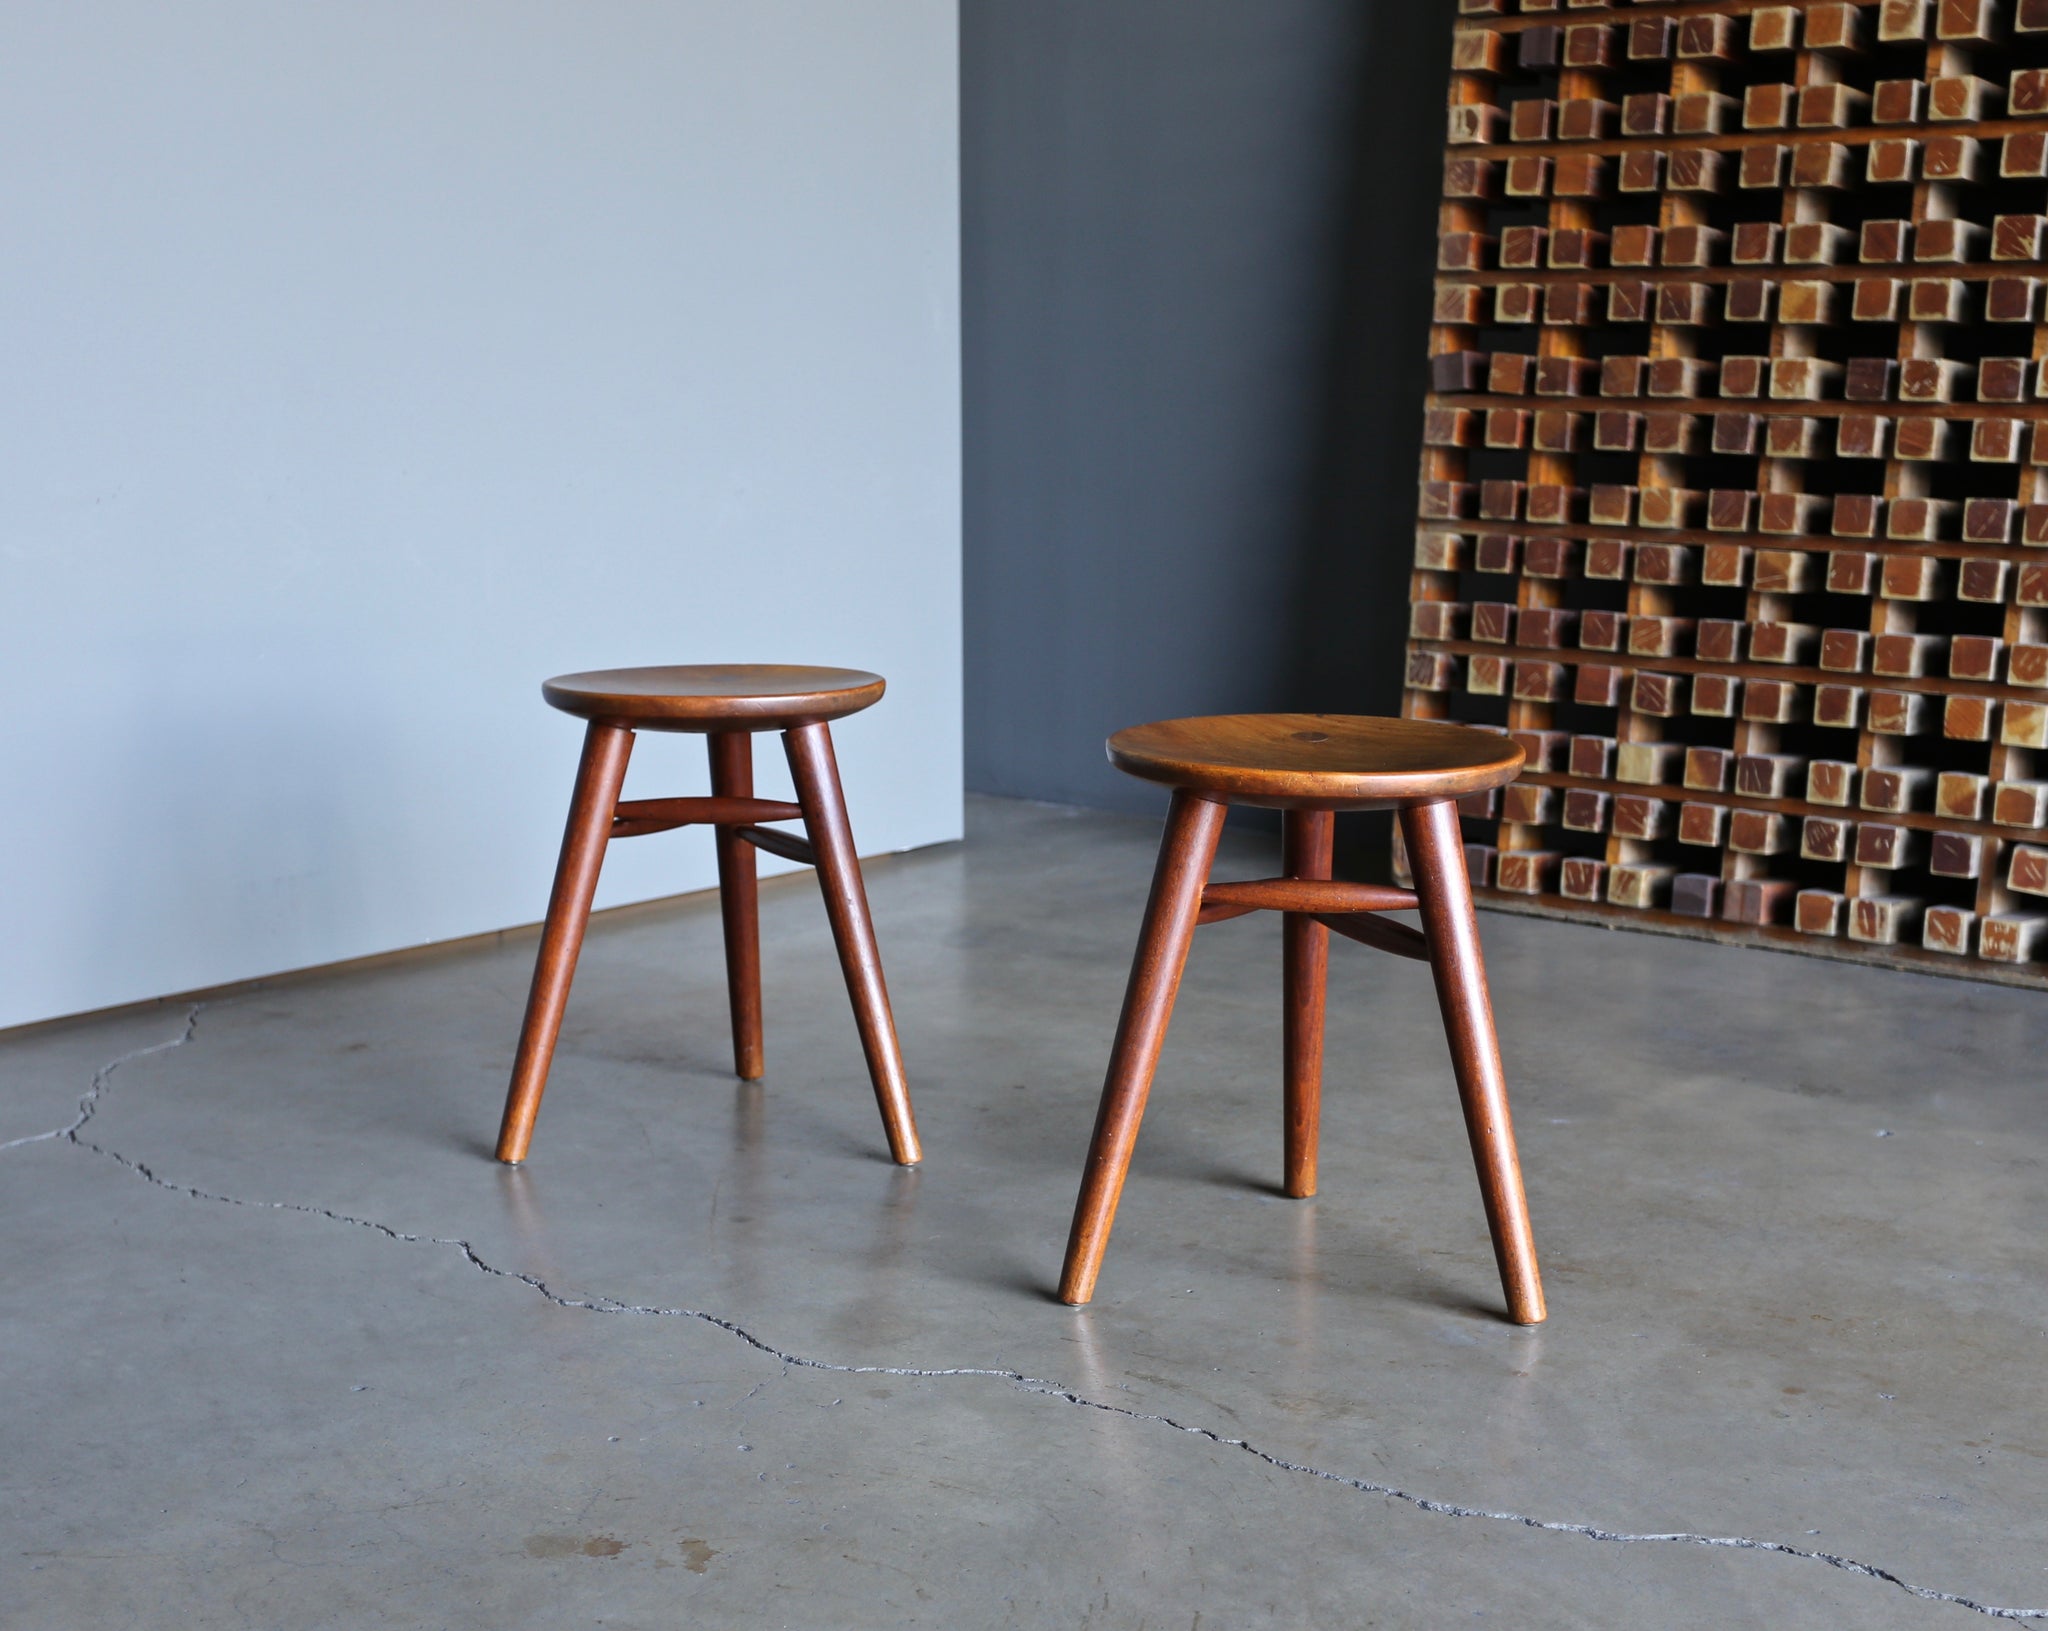 = SOLD = Handcrafted Pair of Tripod Stools circa 1950